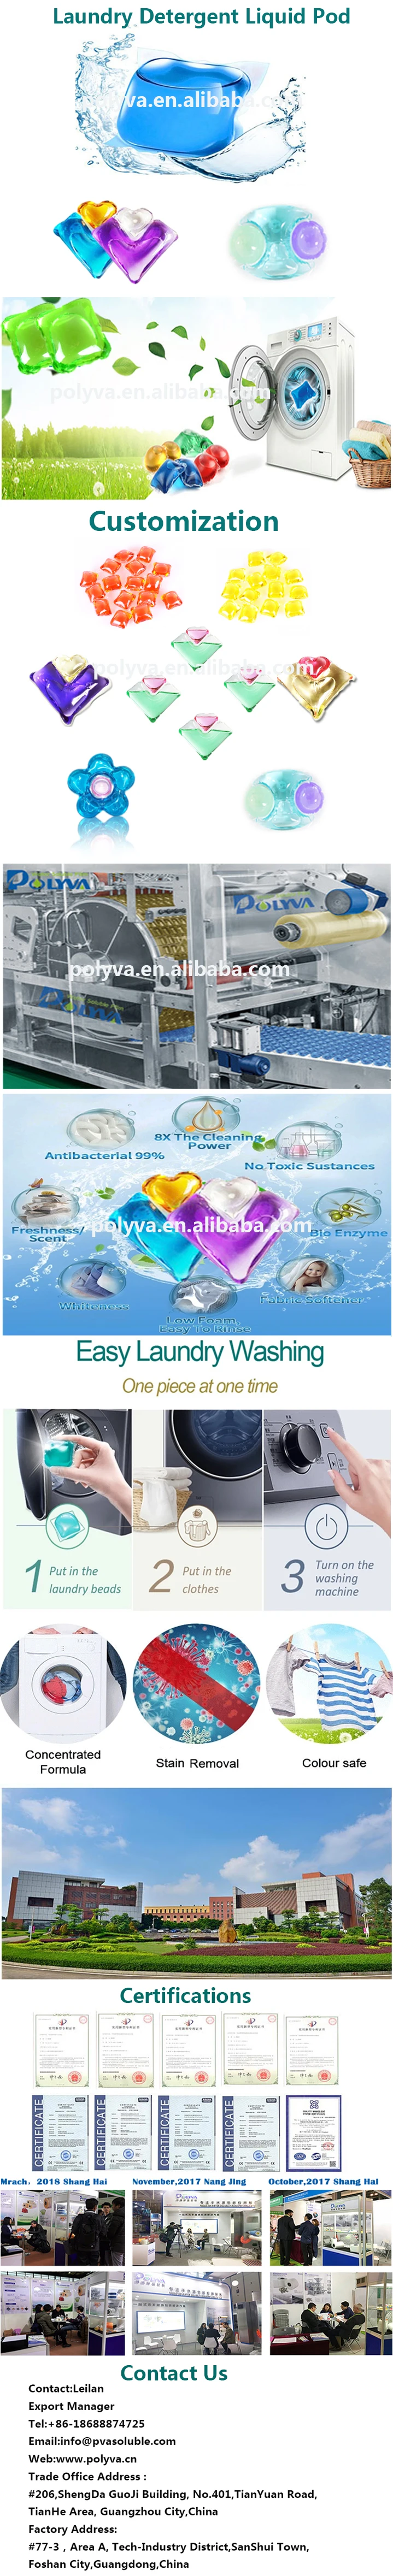 washing machine cloths cleaner dishwasher tablets stretch film laundry pods